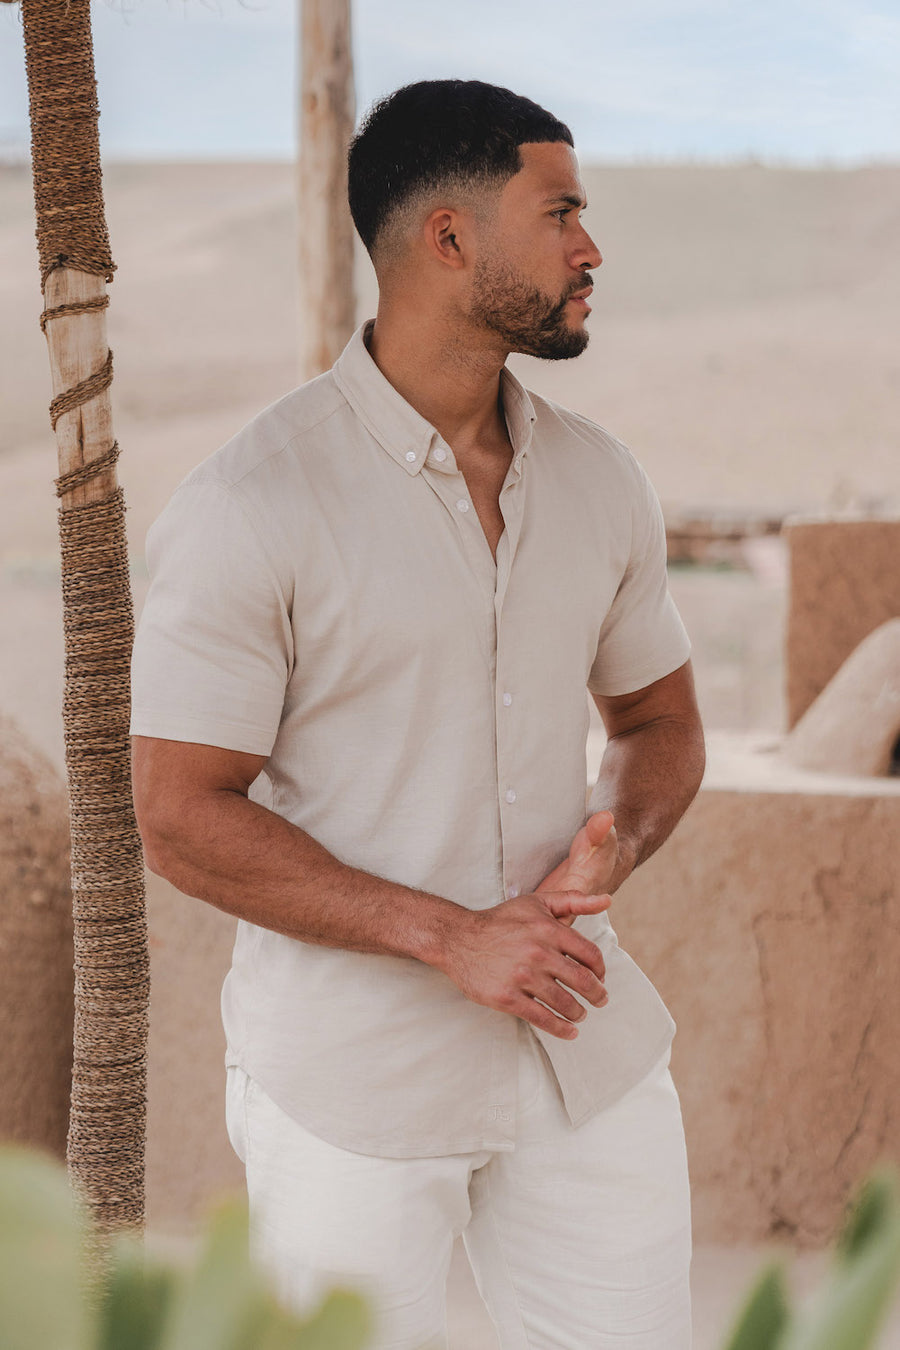 Linen Blend Shirt in Stone - TAILORED ATHLETE - USA